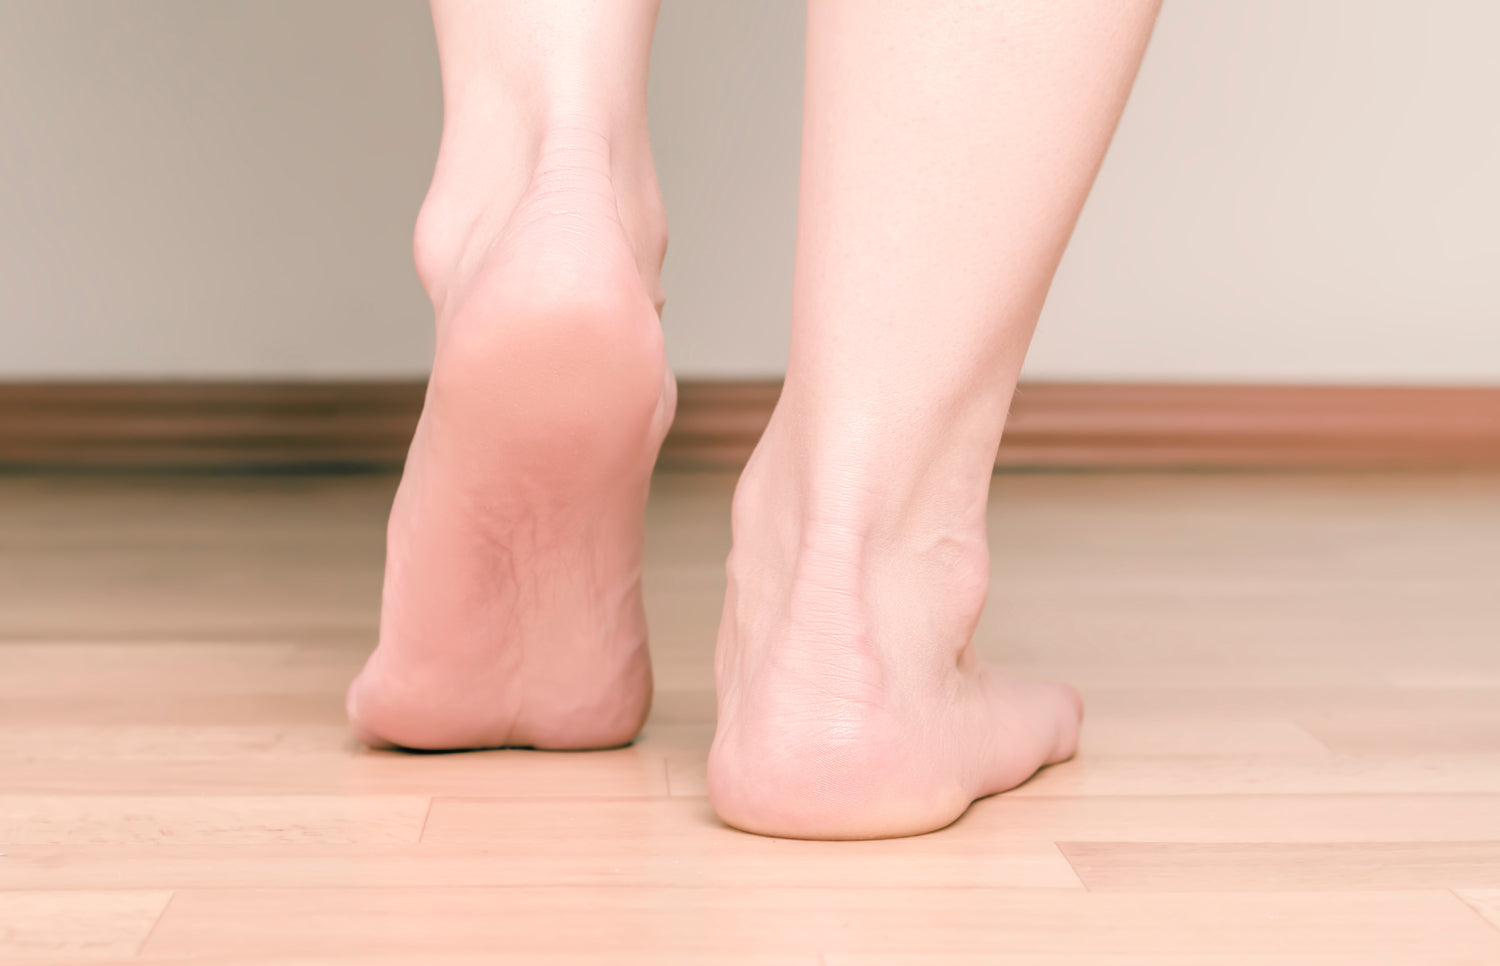 How Do You Know If You Have Flat Feet